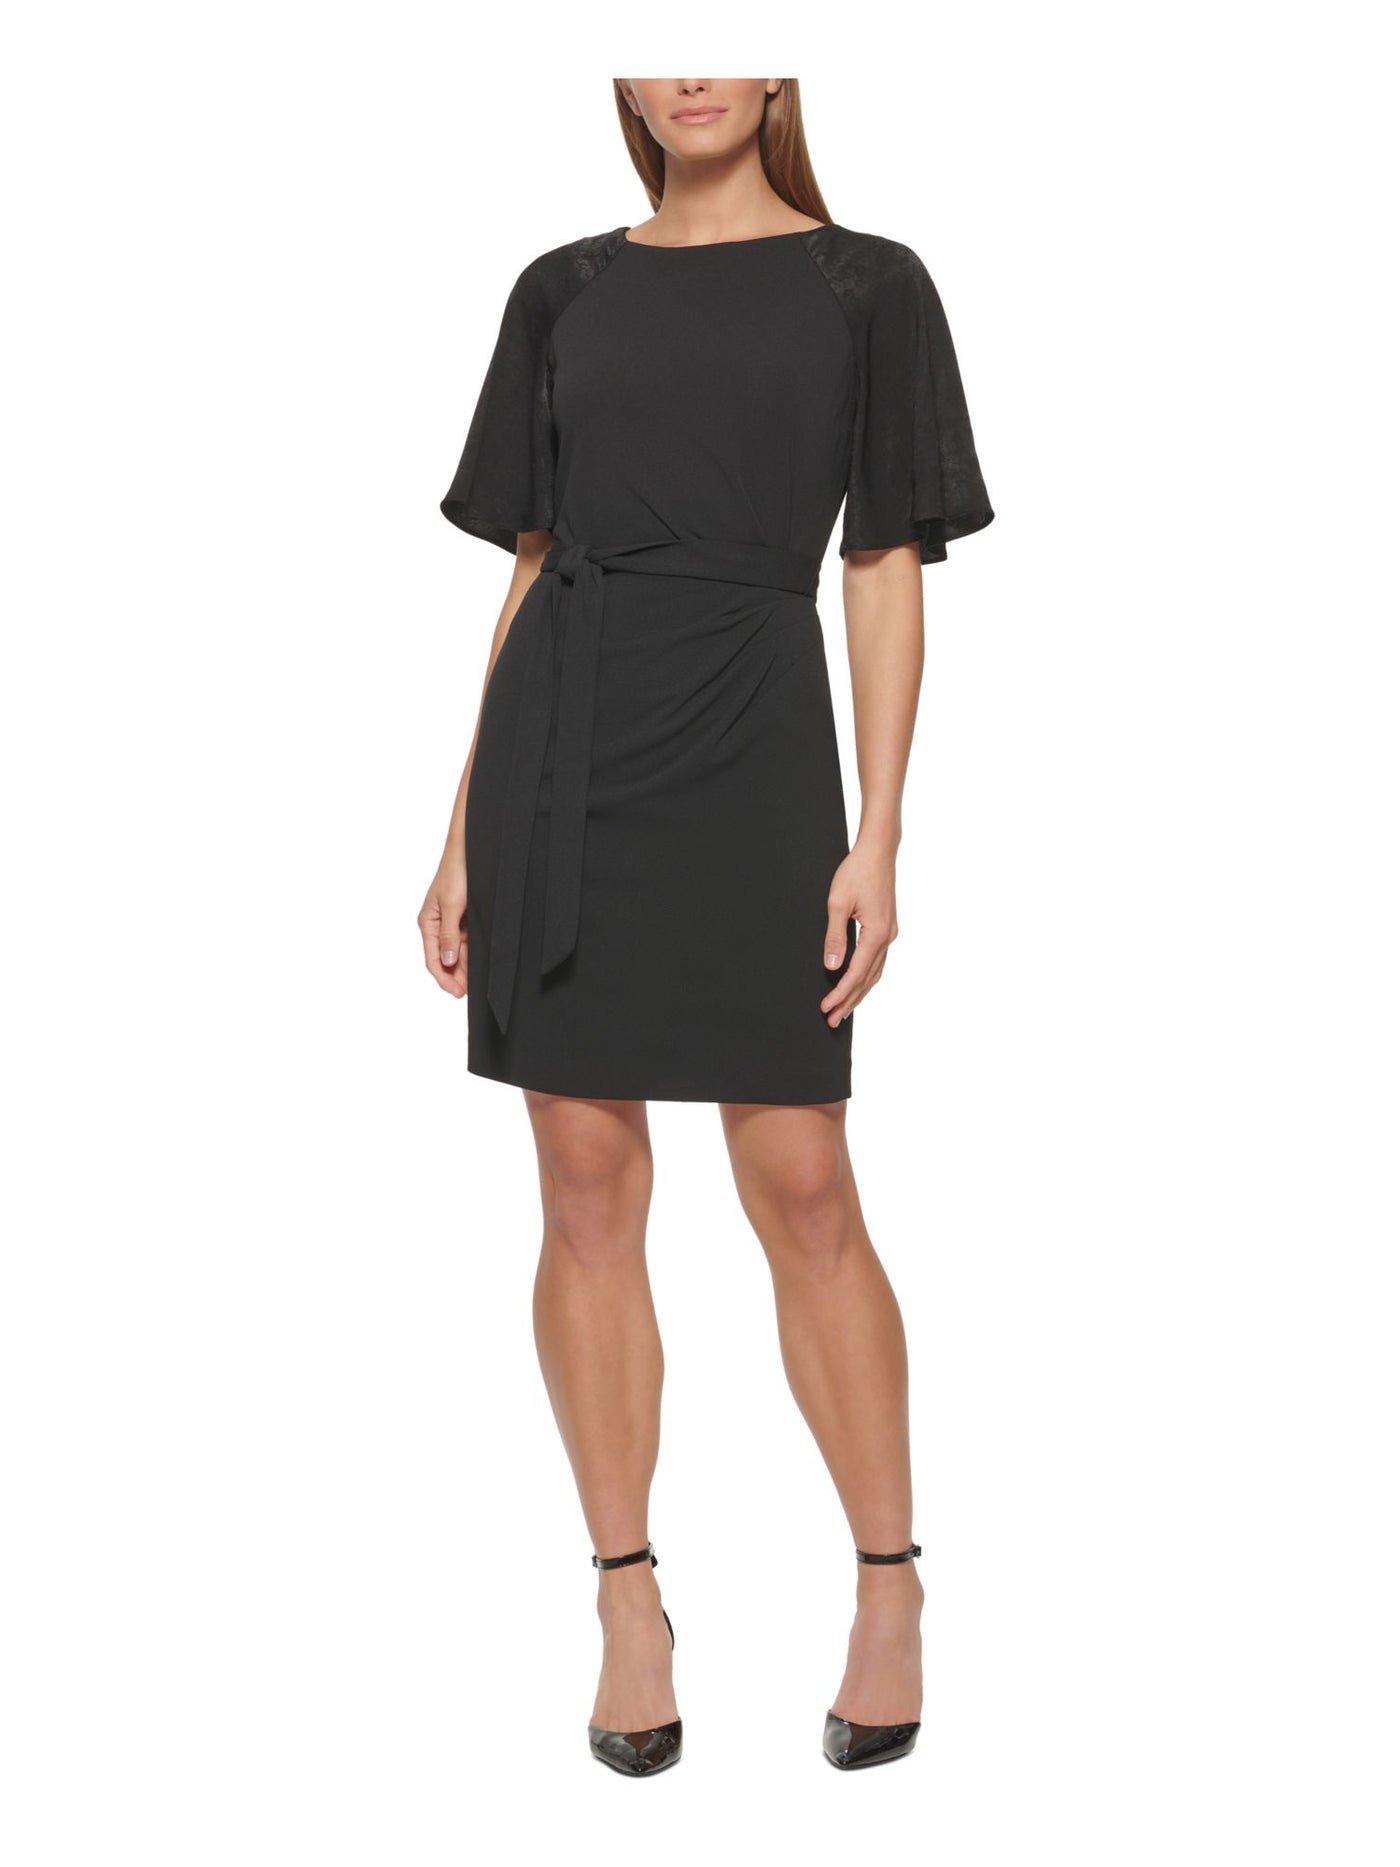 DKNY Womens Black Zippered Belted Flutter Sleeve Crew Neck Above The Knee Wear To Work Sheath Dress 12